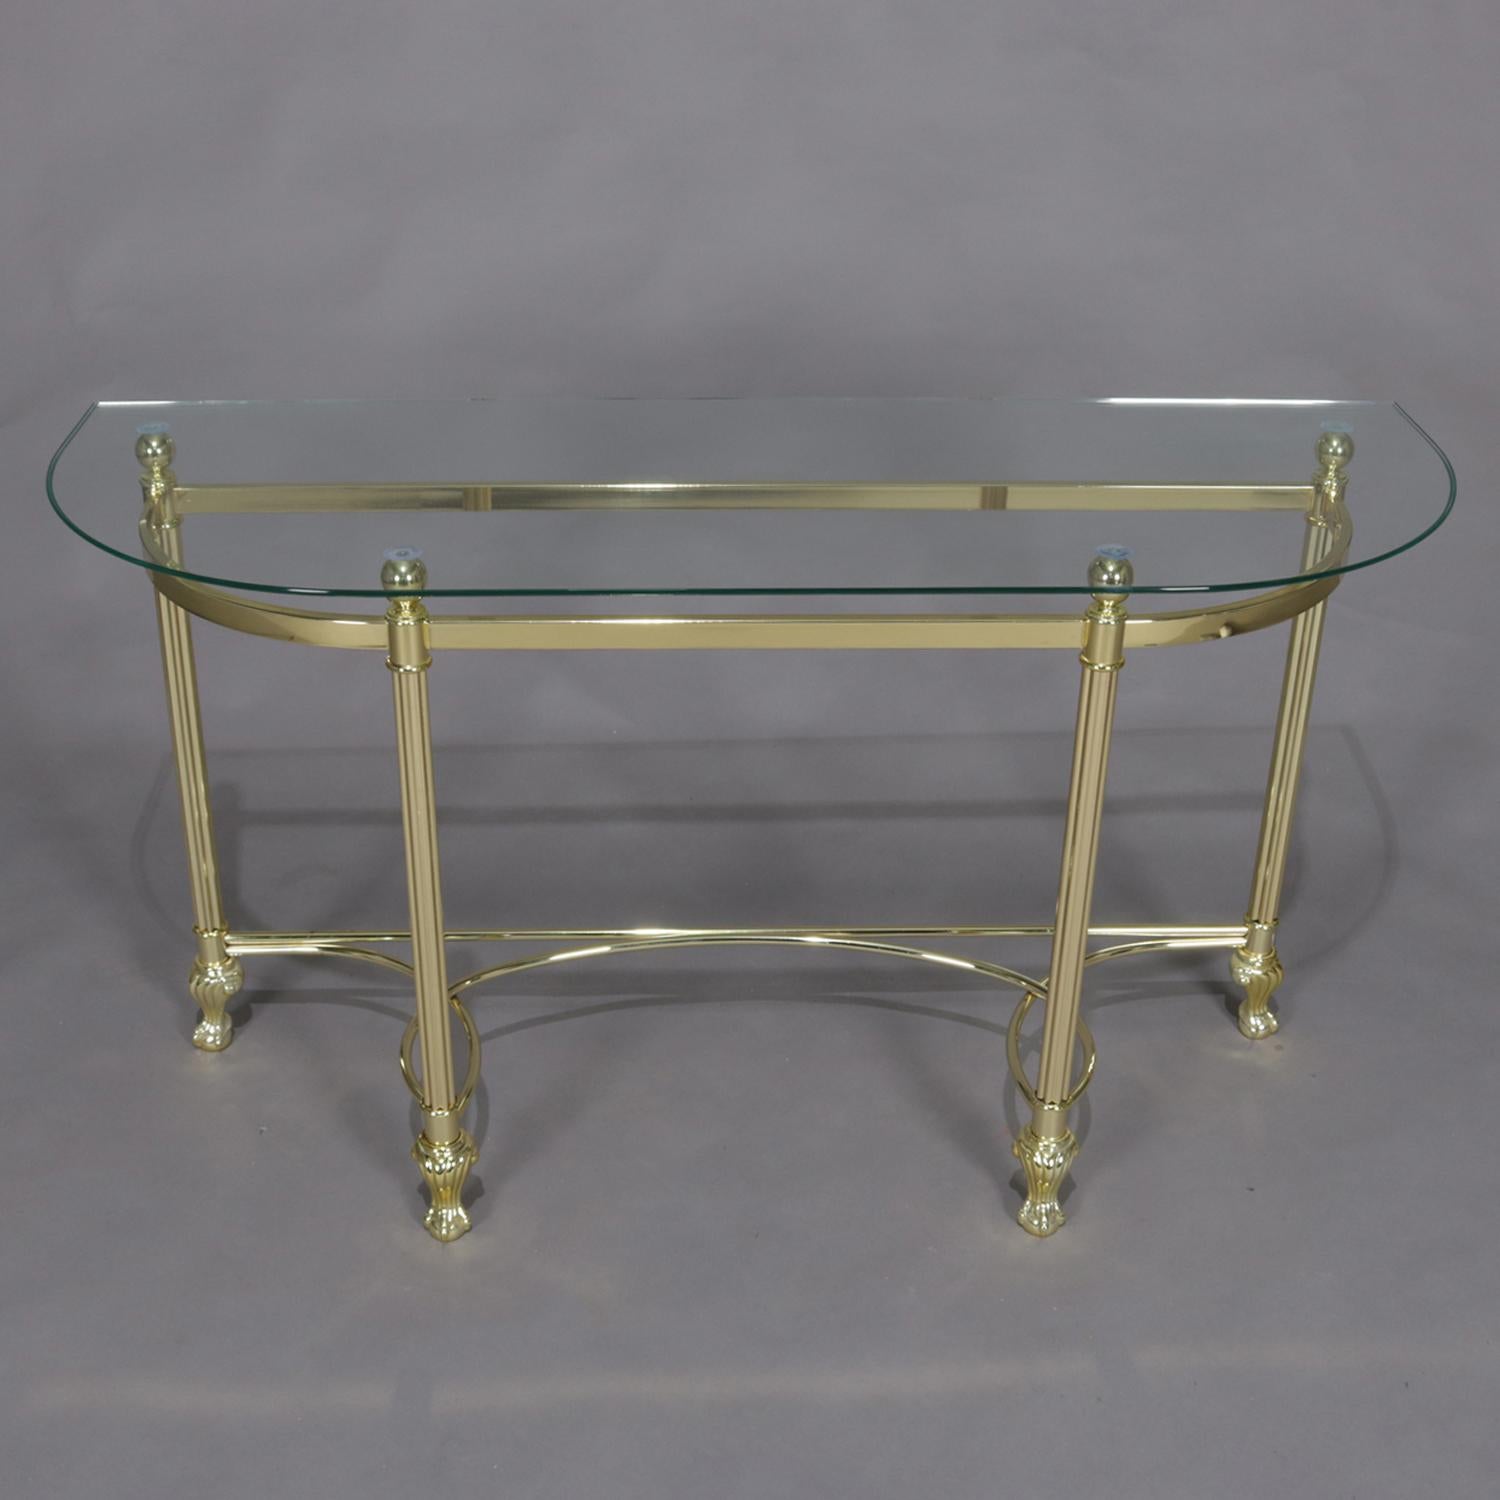 Italian transitional console table features demilune form with glass top over brass frame having open single rail apron with four reeded legs terminating in paw feet with scrolled stretcher, circa 1970.

Measures: 27.5